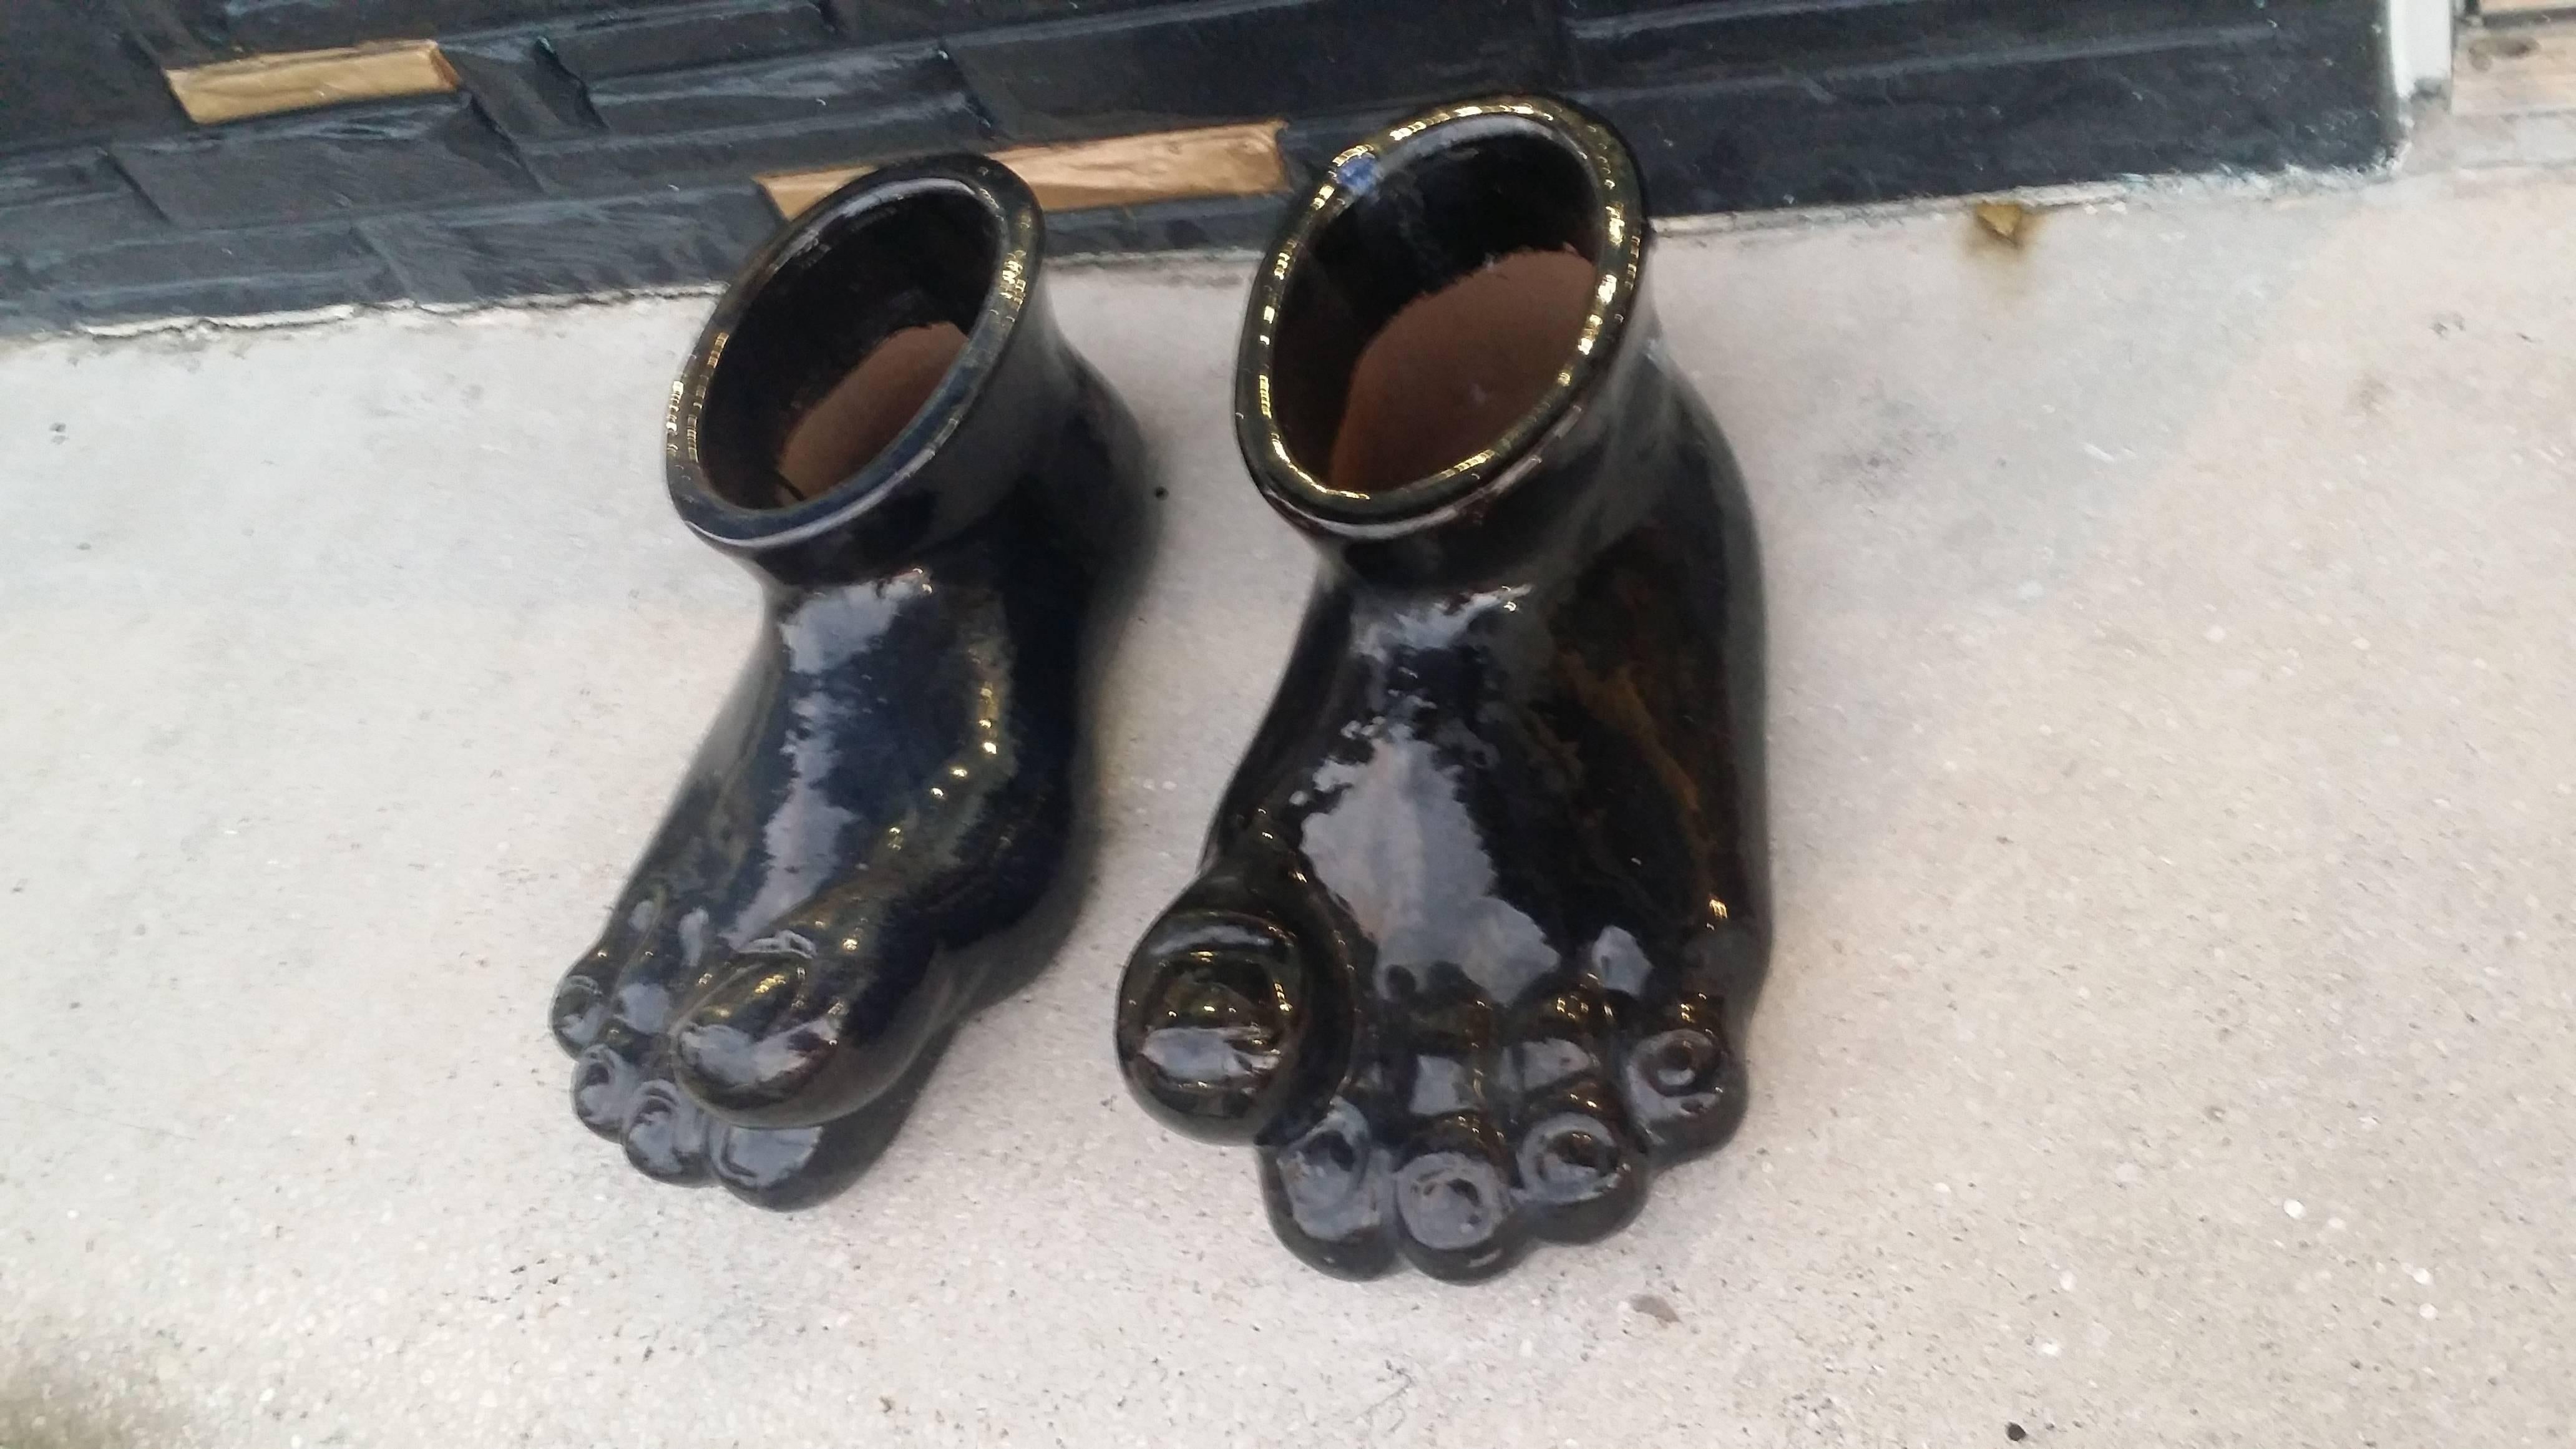 Amazing one of a kind pair of Monumental size feet, left and right, sculpture. Terra cotta glazed blue underneath with a black top coat. No chips or breaks. These are huge! Measures 23 long x 9 tall x 11 wide. You can use these as is or fill them